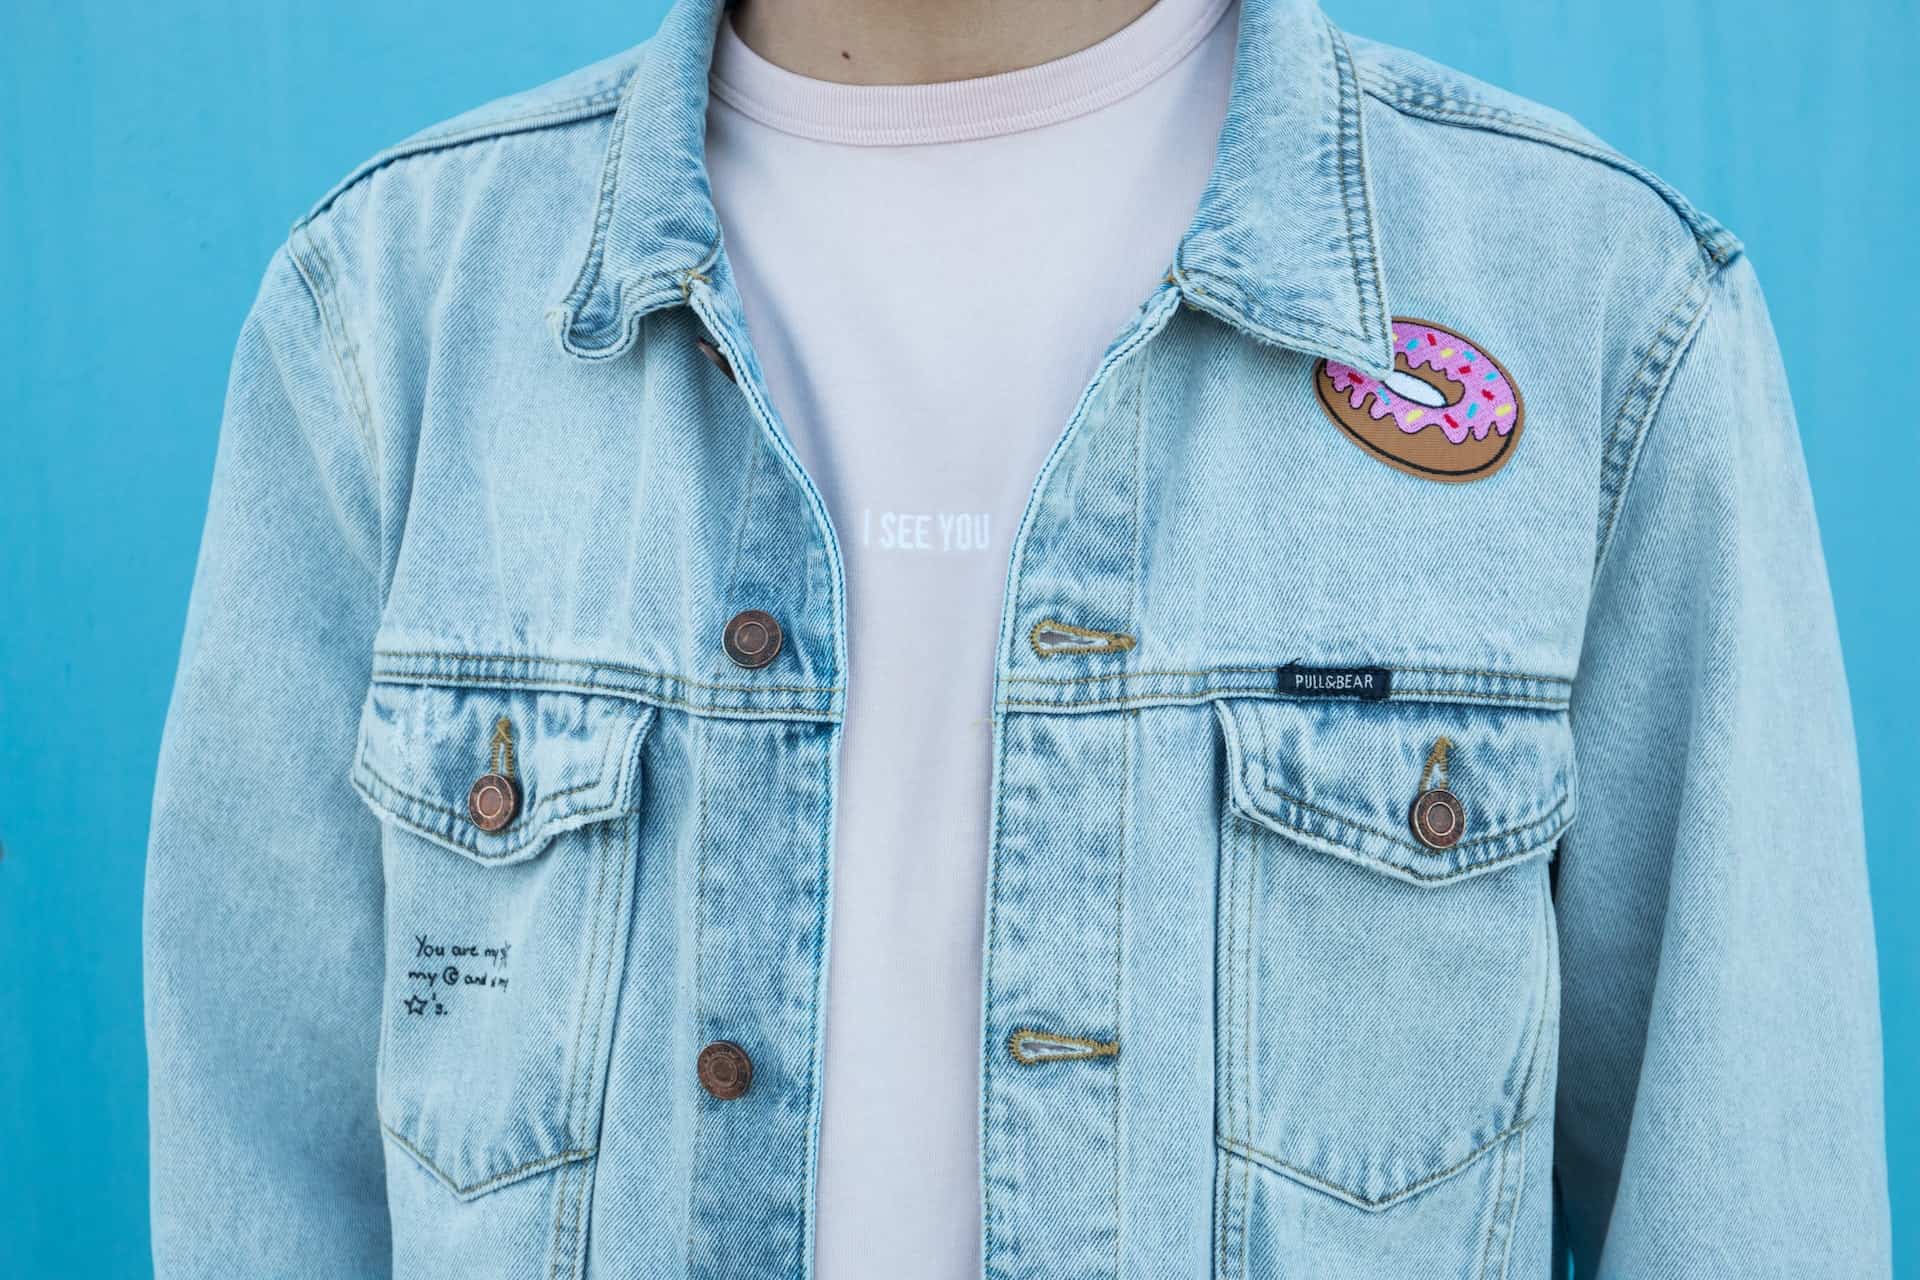 What to wear a denim jacket with?